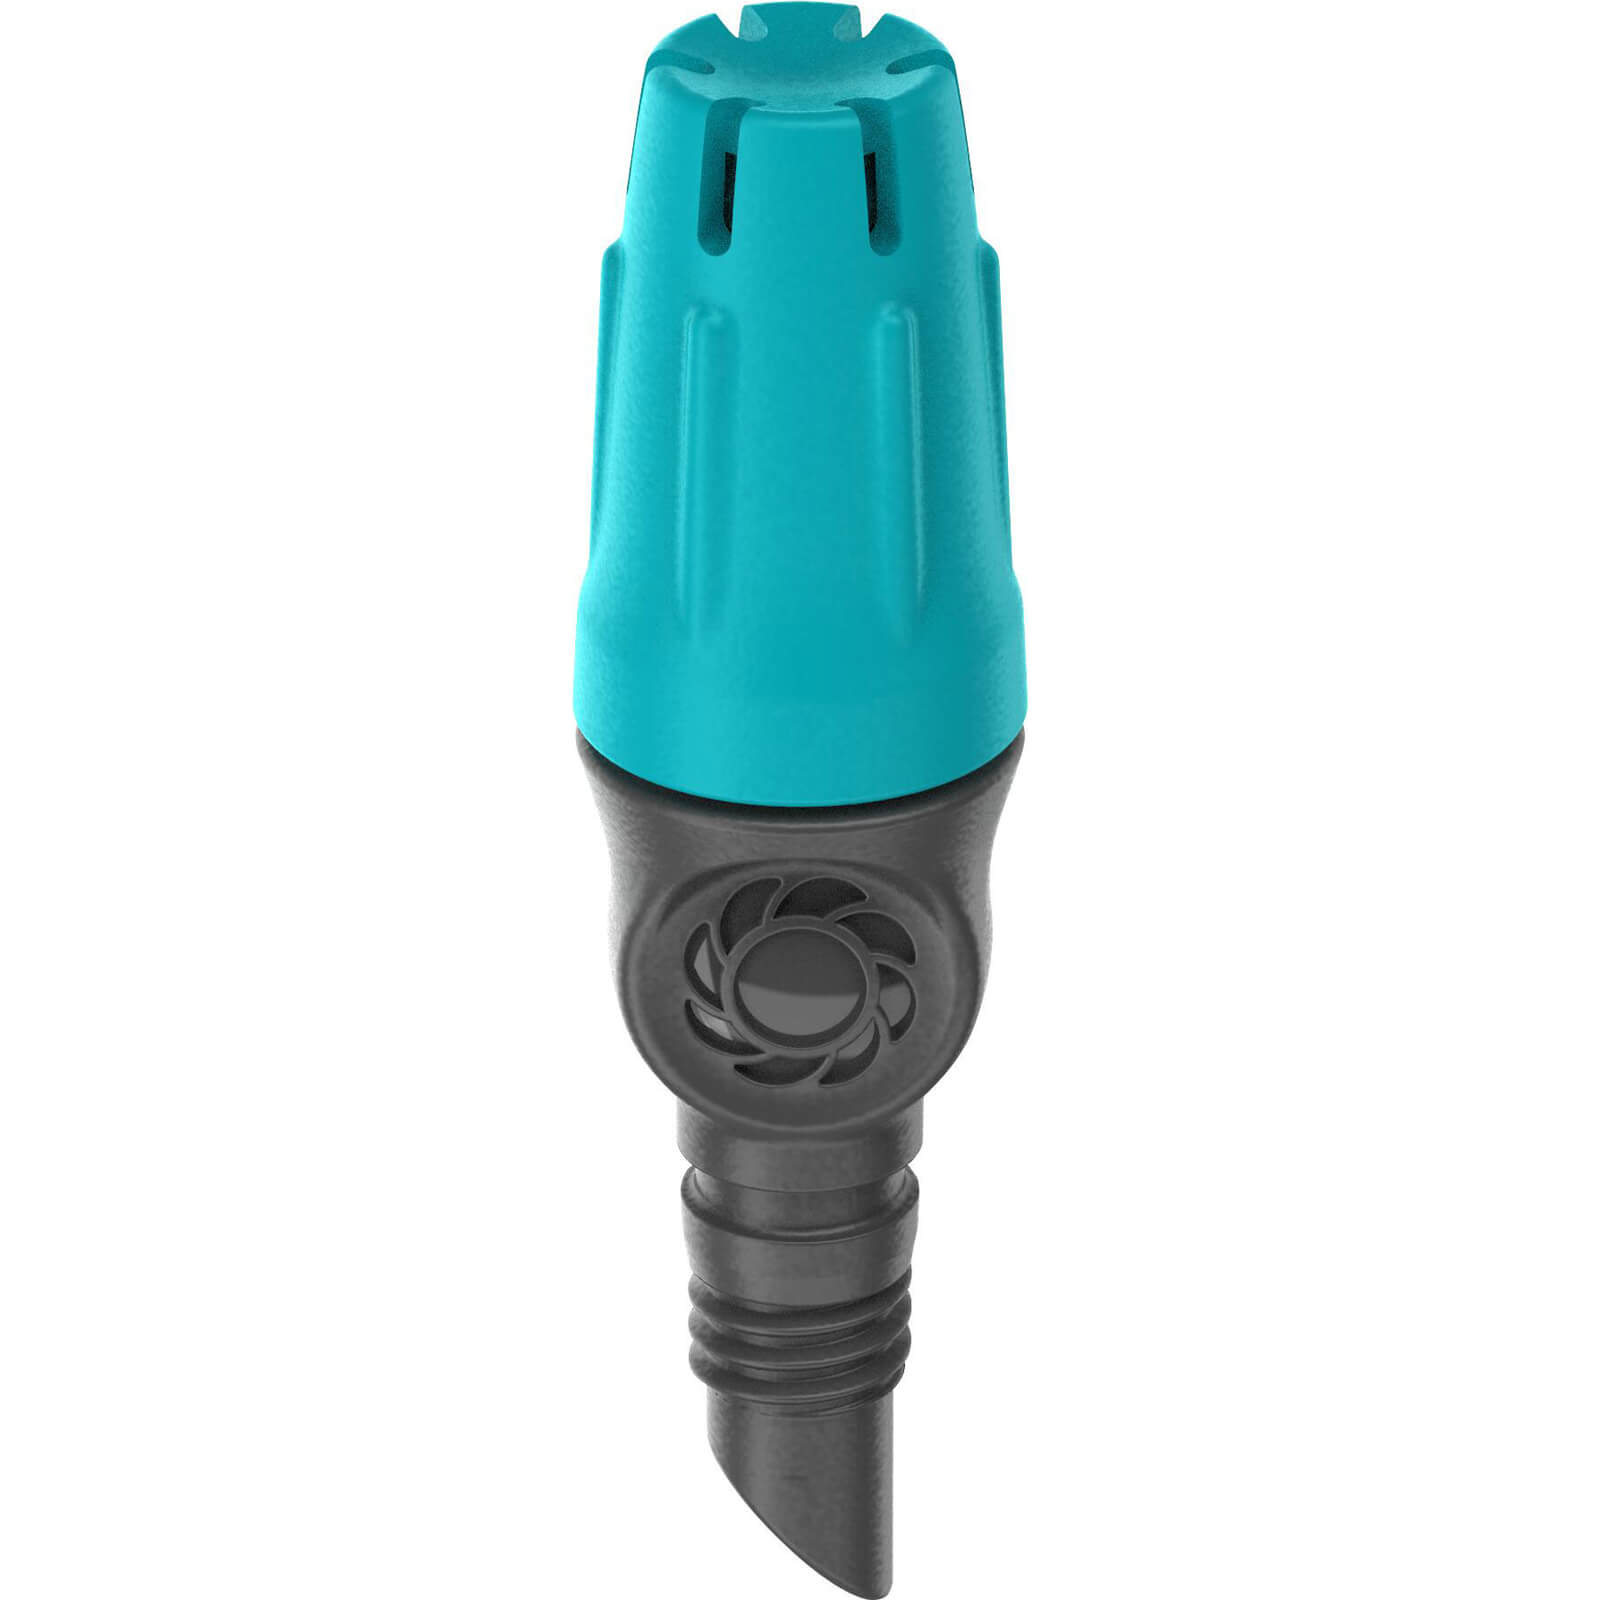 Image of Gardena MICRO DRIP Endline Small Area Spray Nozzle (New) 3/16" / 4.6mm Pack of 10